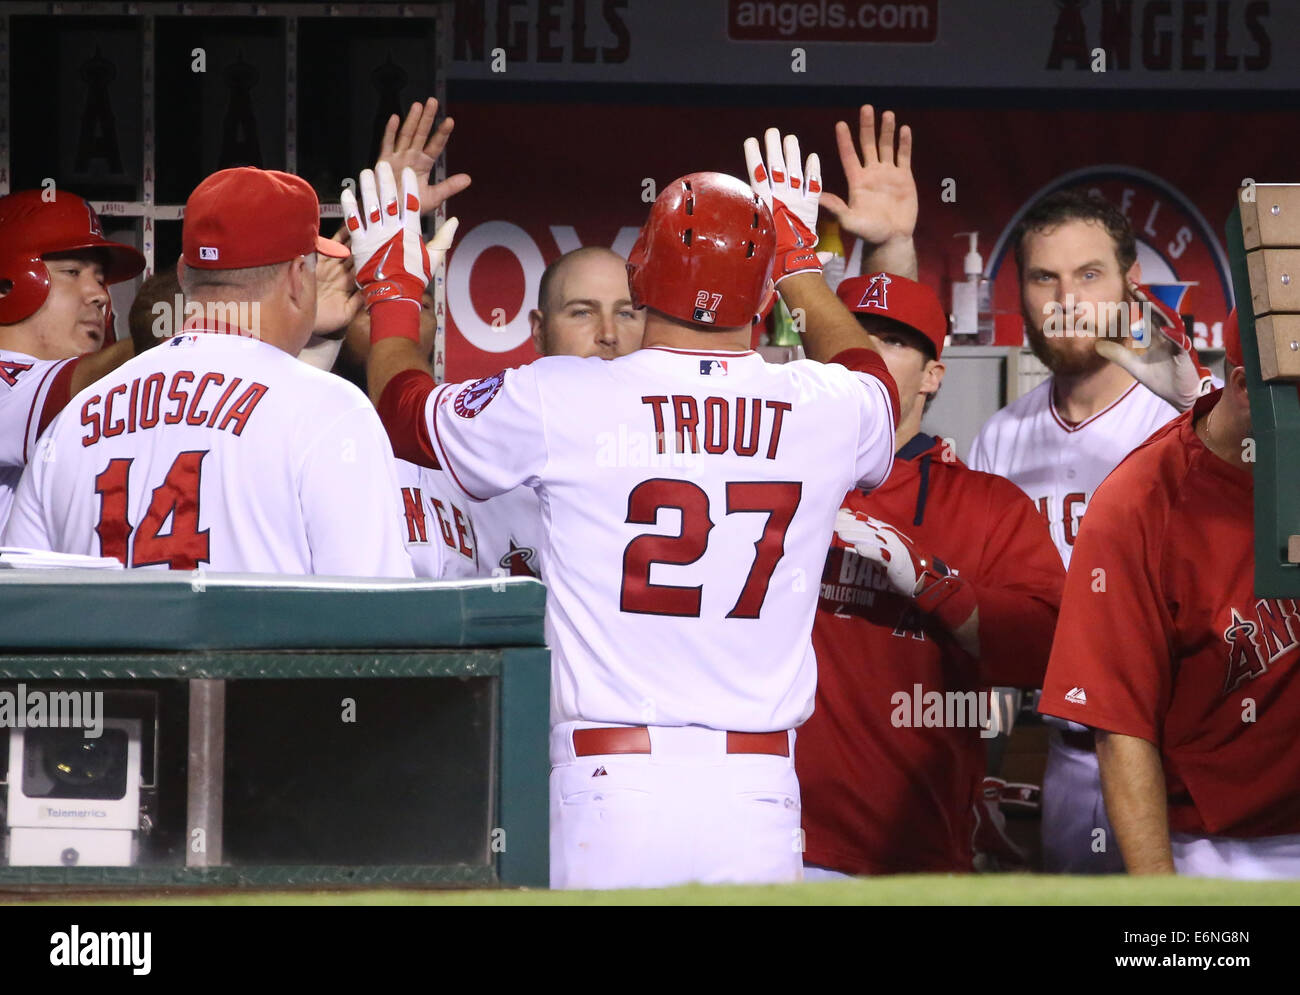 Anaheim, CA, I.E. USA. 27th Aug, 2014. August 27, 2014: Miami Marlins and Los Angeles Angels of Anaheim, Angel Stadium in Anaheim, CA. Mike Trout #27 celebrates with his teammates after his home run. Credit:  Peter Joneleit/ZUMA Wire/ZUMAPRESS.com/Alamy Live News Stock Photo